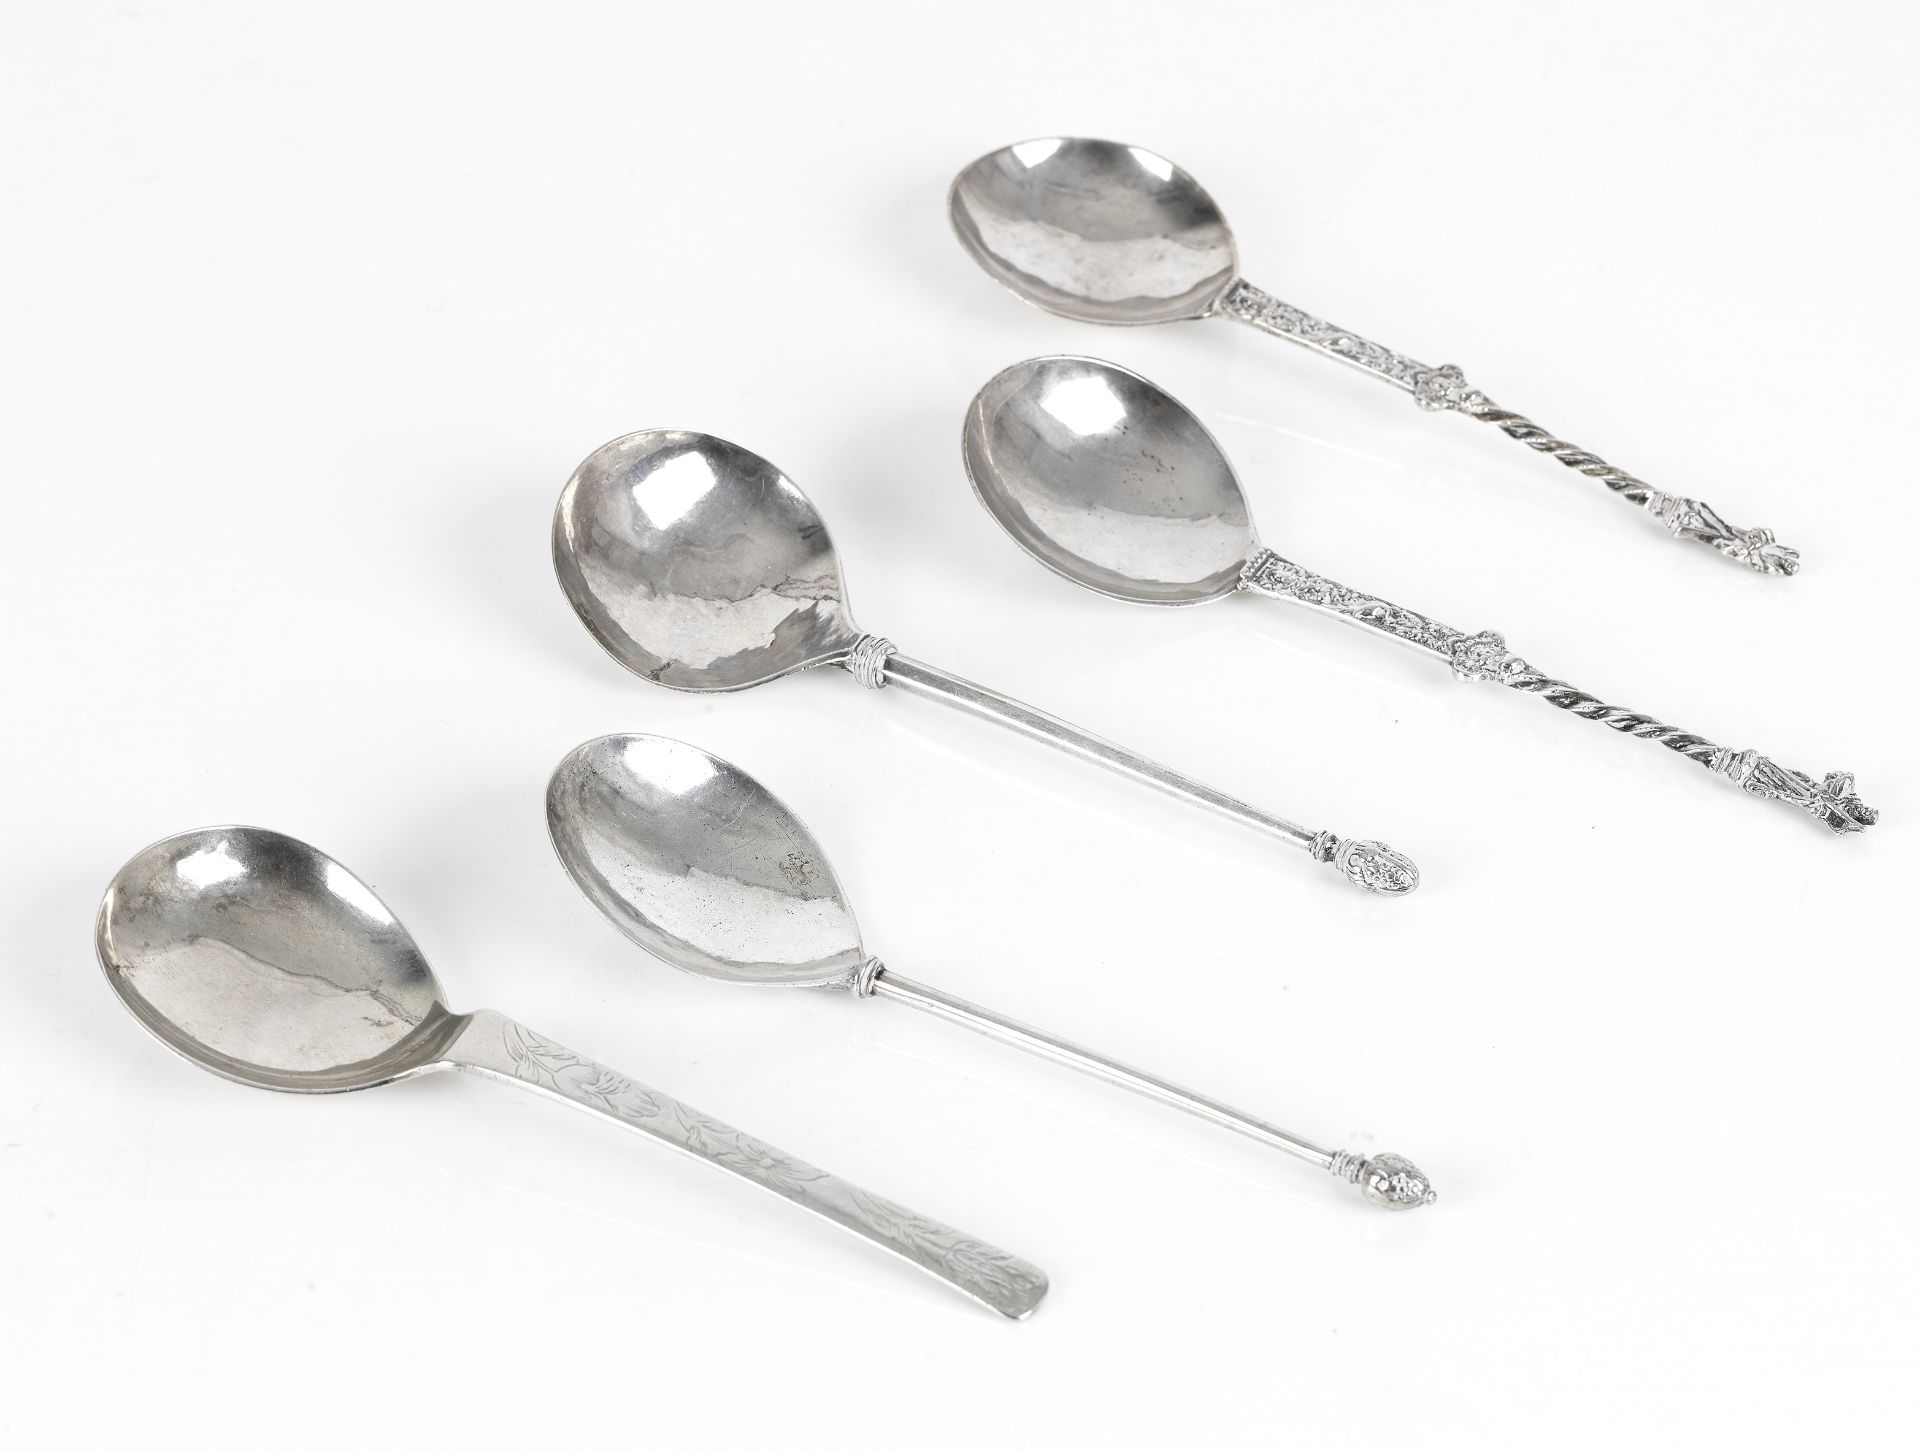 Five Baltic or Scandinavian Silver Spoons 17th century (5)